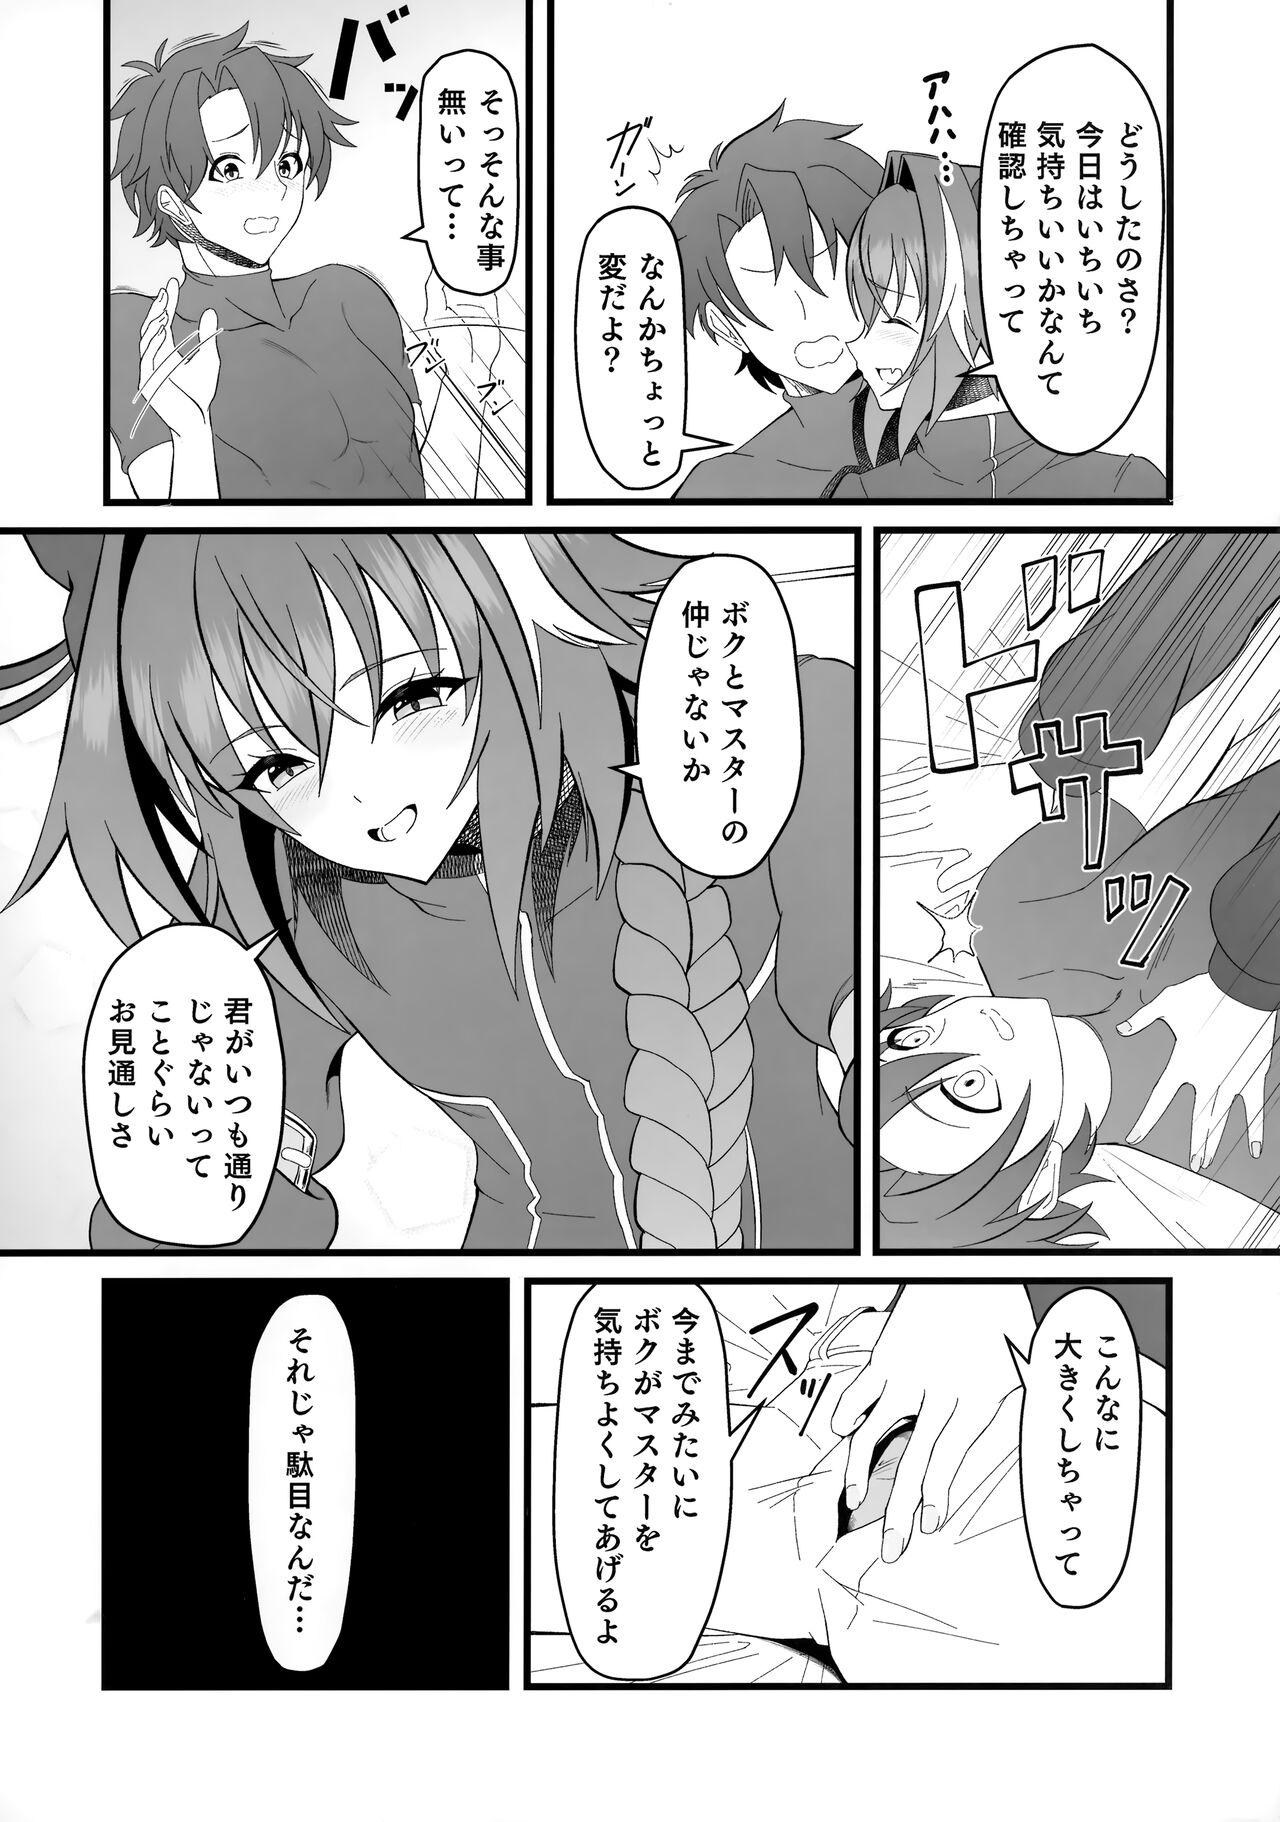 Animated Kimi no Ichiban ni Naritakute - I wanted to be your number one. - Fate grand order Clothed - Page 7